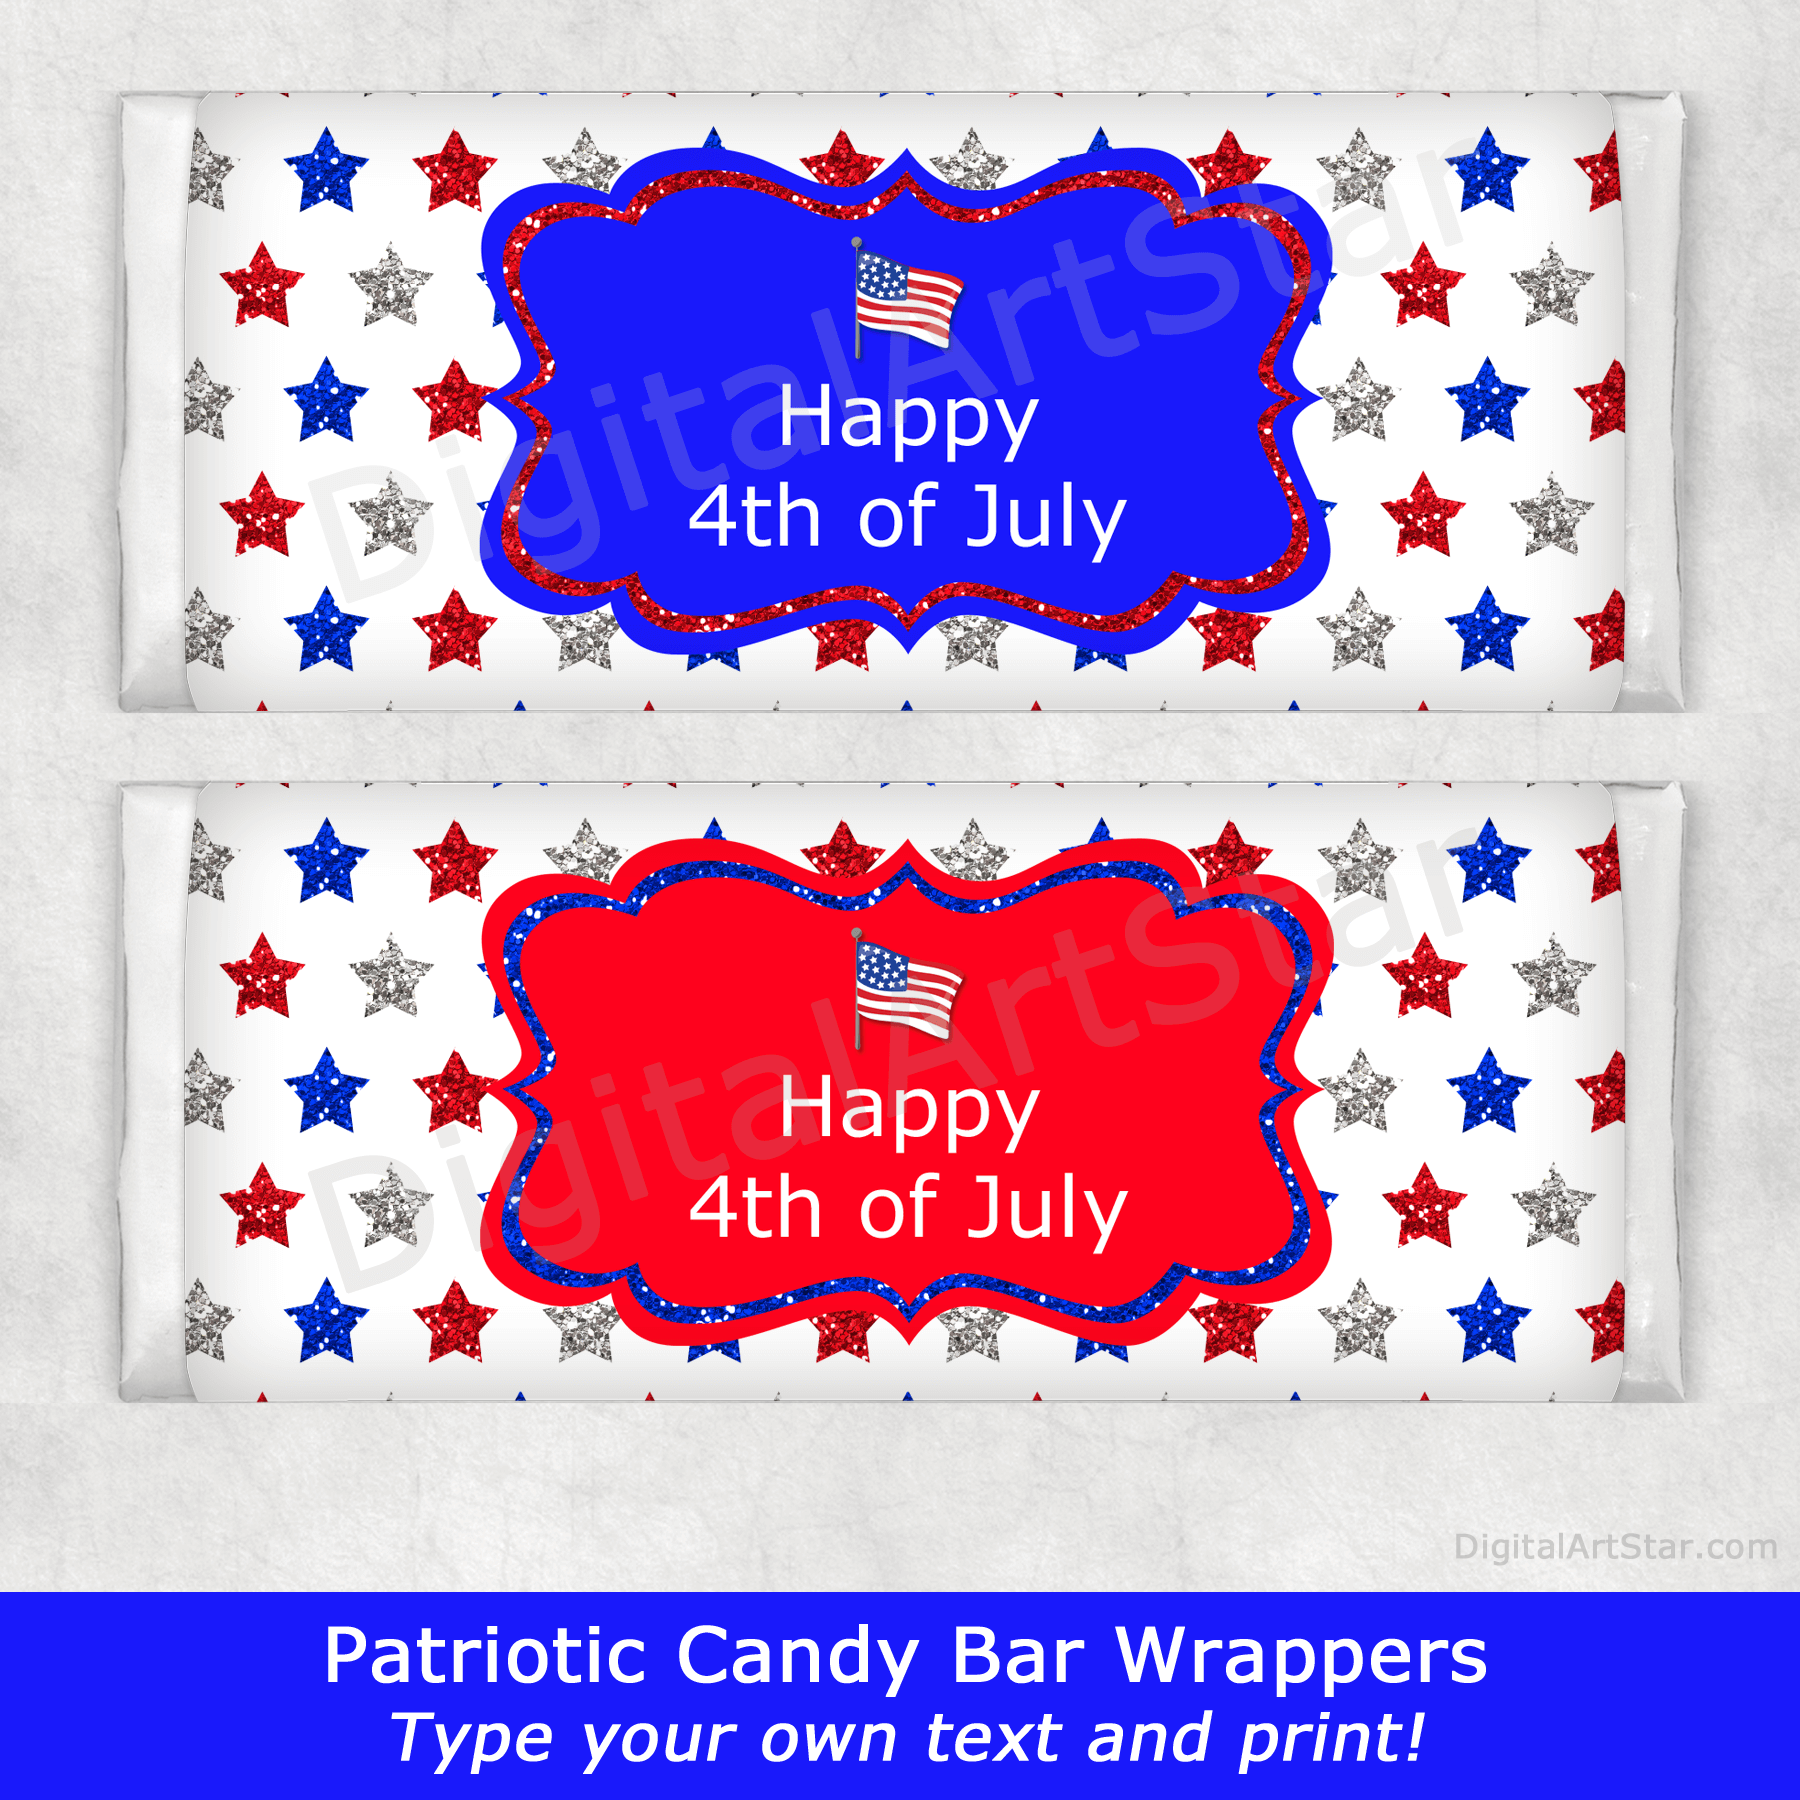 4th of July Candy Bar Wrappers with Red, White, and Blue Glitter Stars